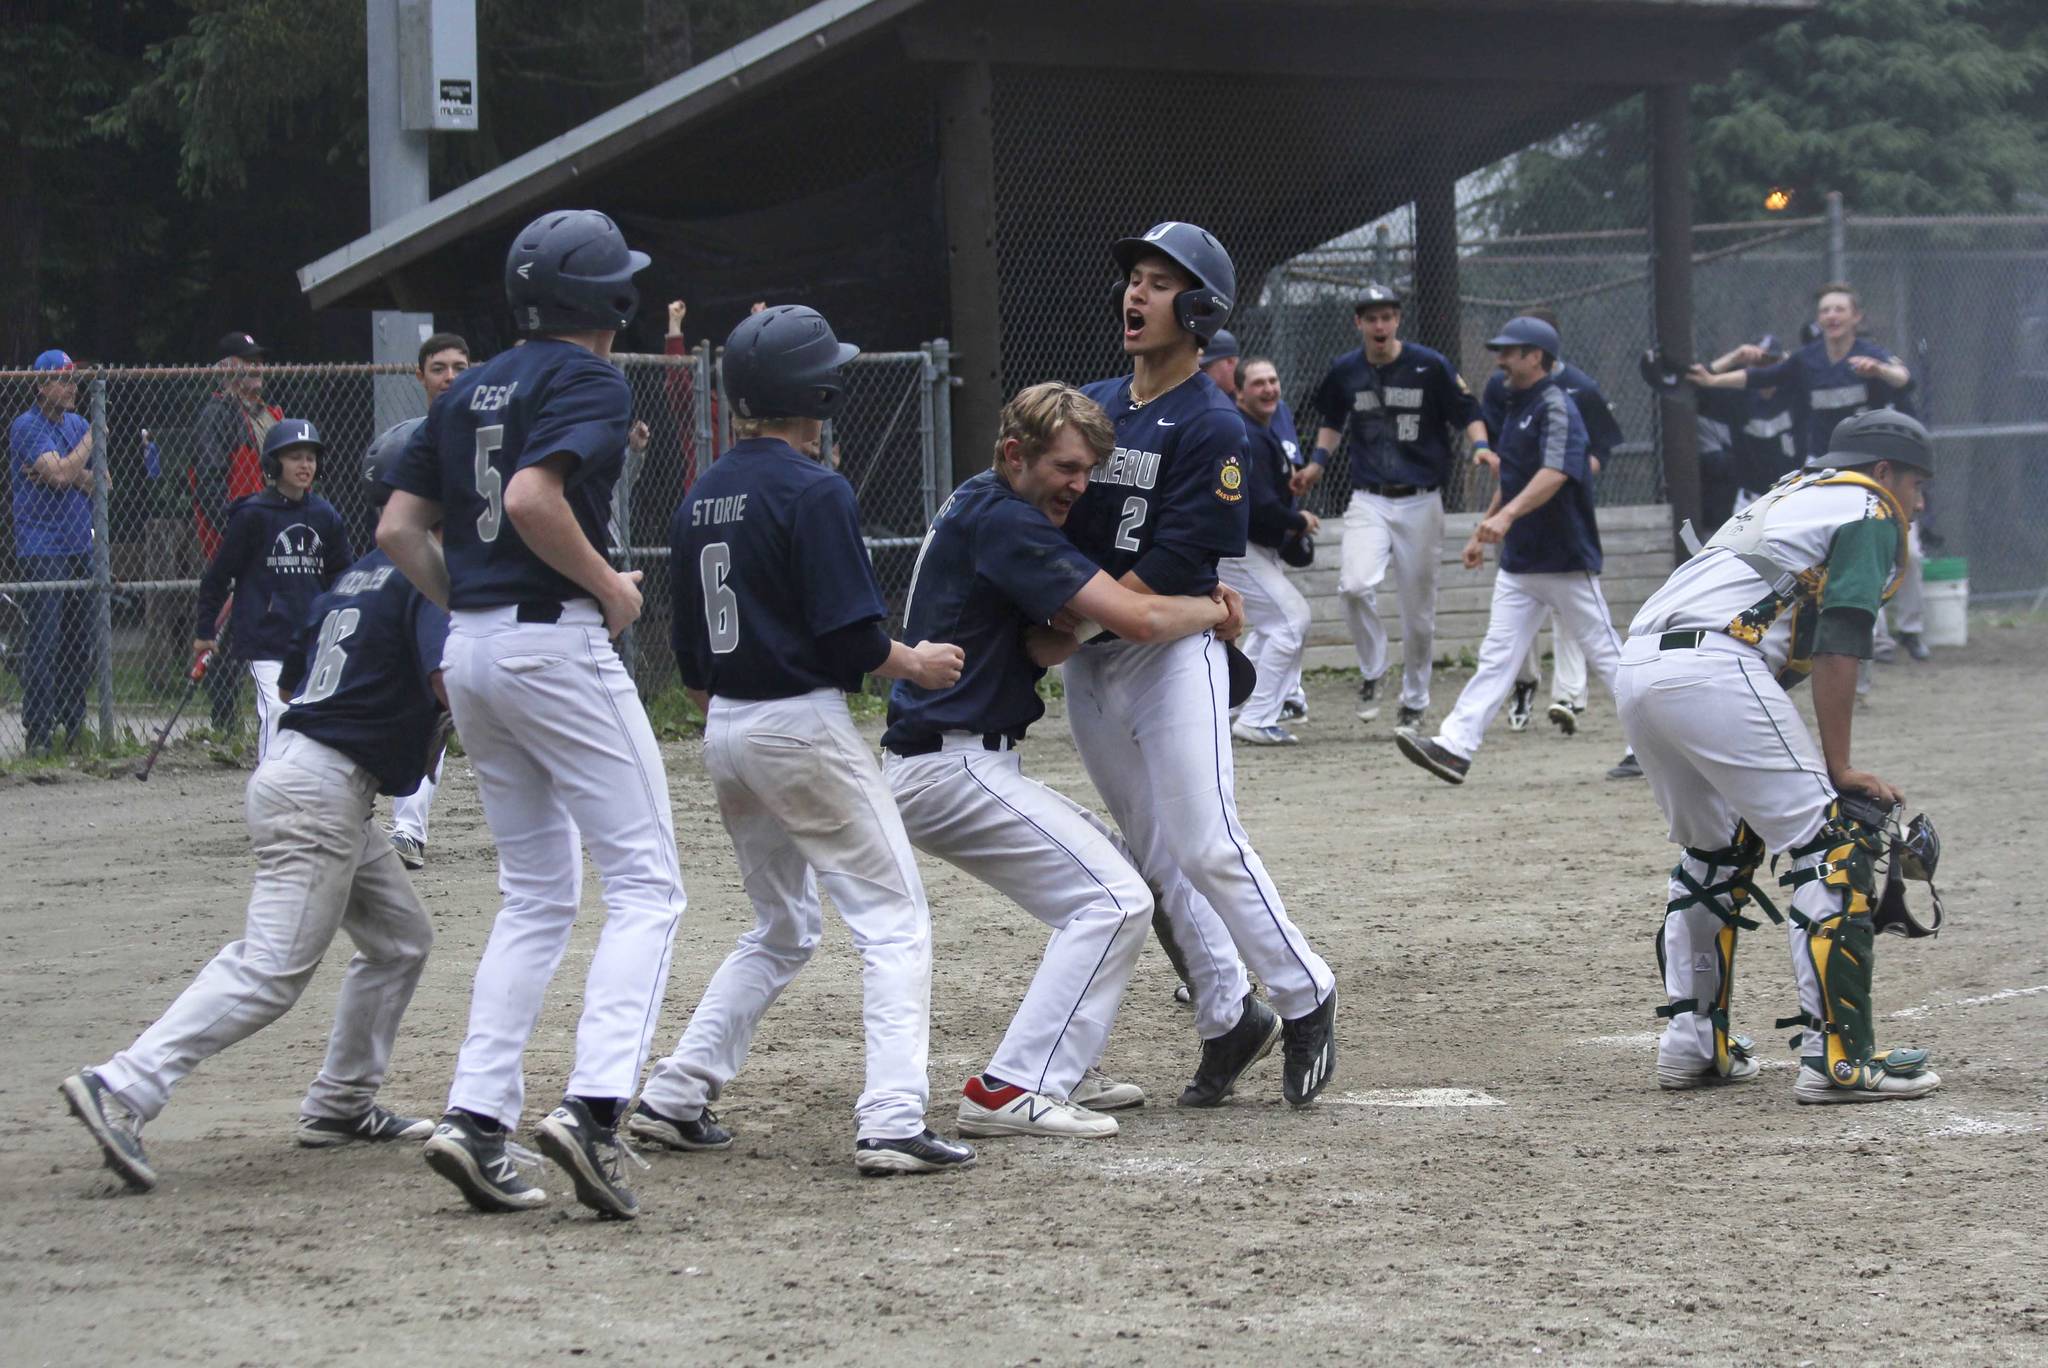 Owen Mendoza scores the winning run in Juneau Post 25’s walk-off 4-3 victory over Service Post 28 Saturday at Adair-Kennedy Memorial Park. Mendoza scored from first base on Alex Muir’s game-winning double. (Alex McCarthy | Juneau Empire)